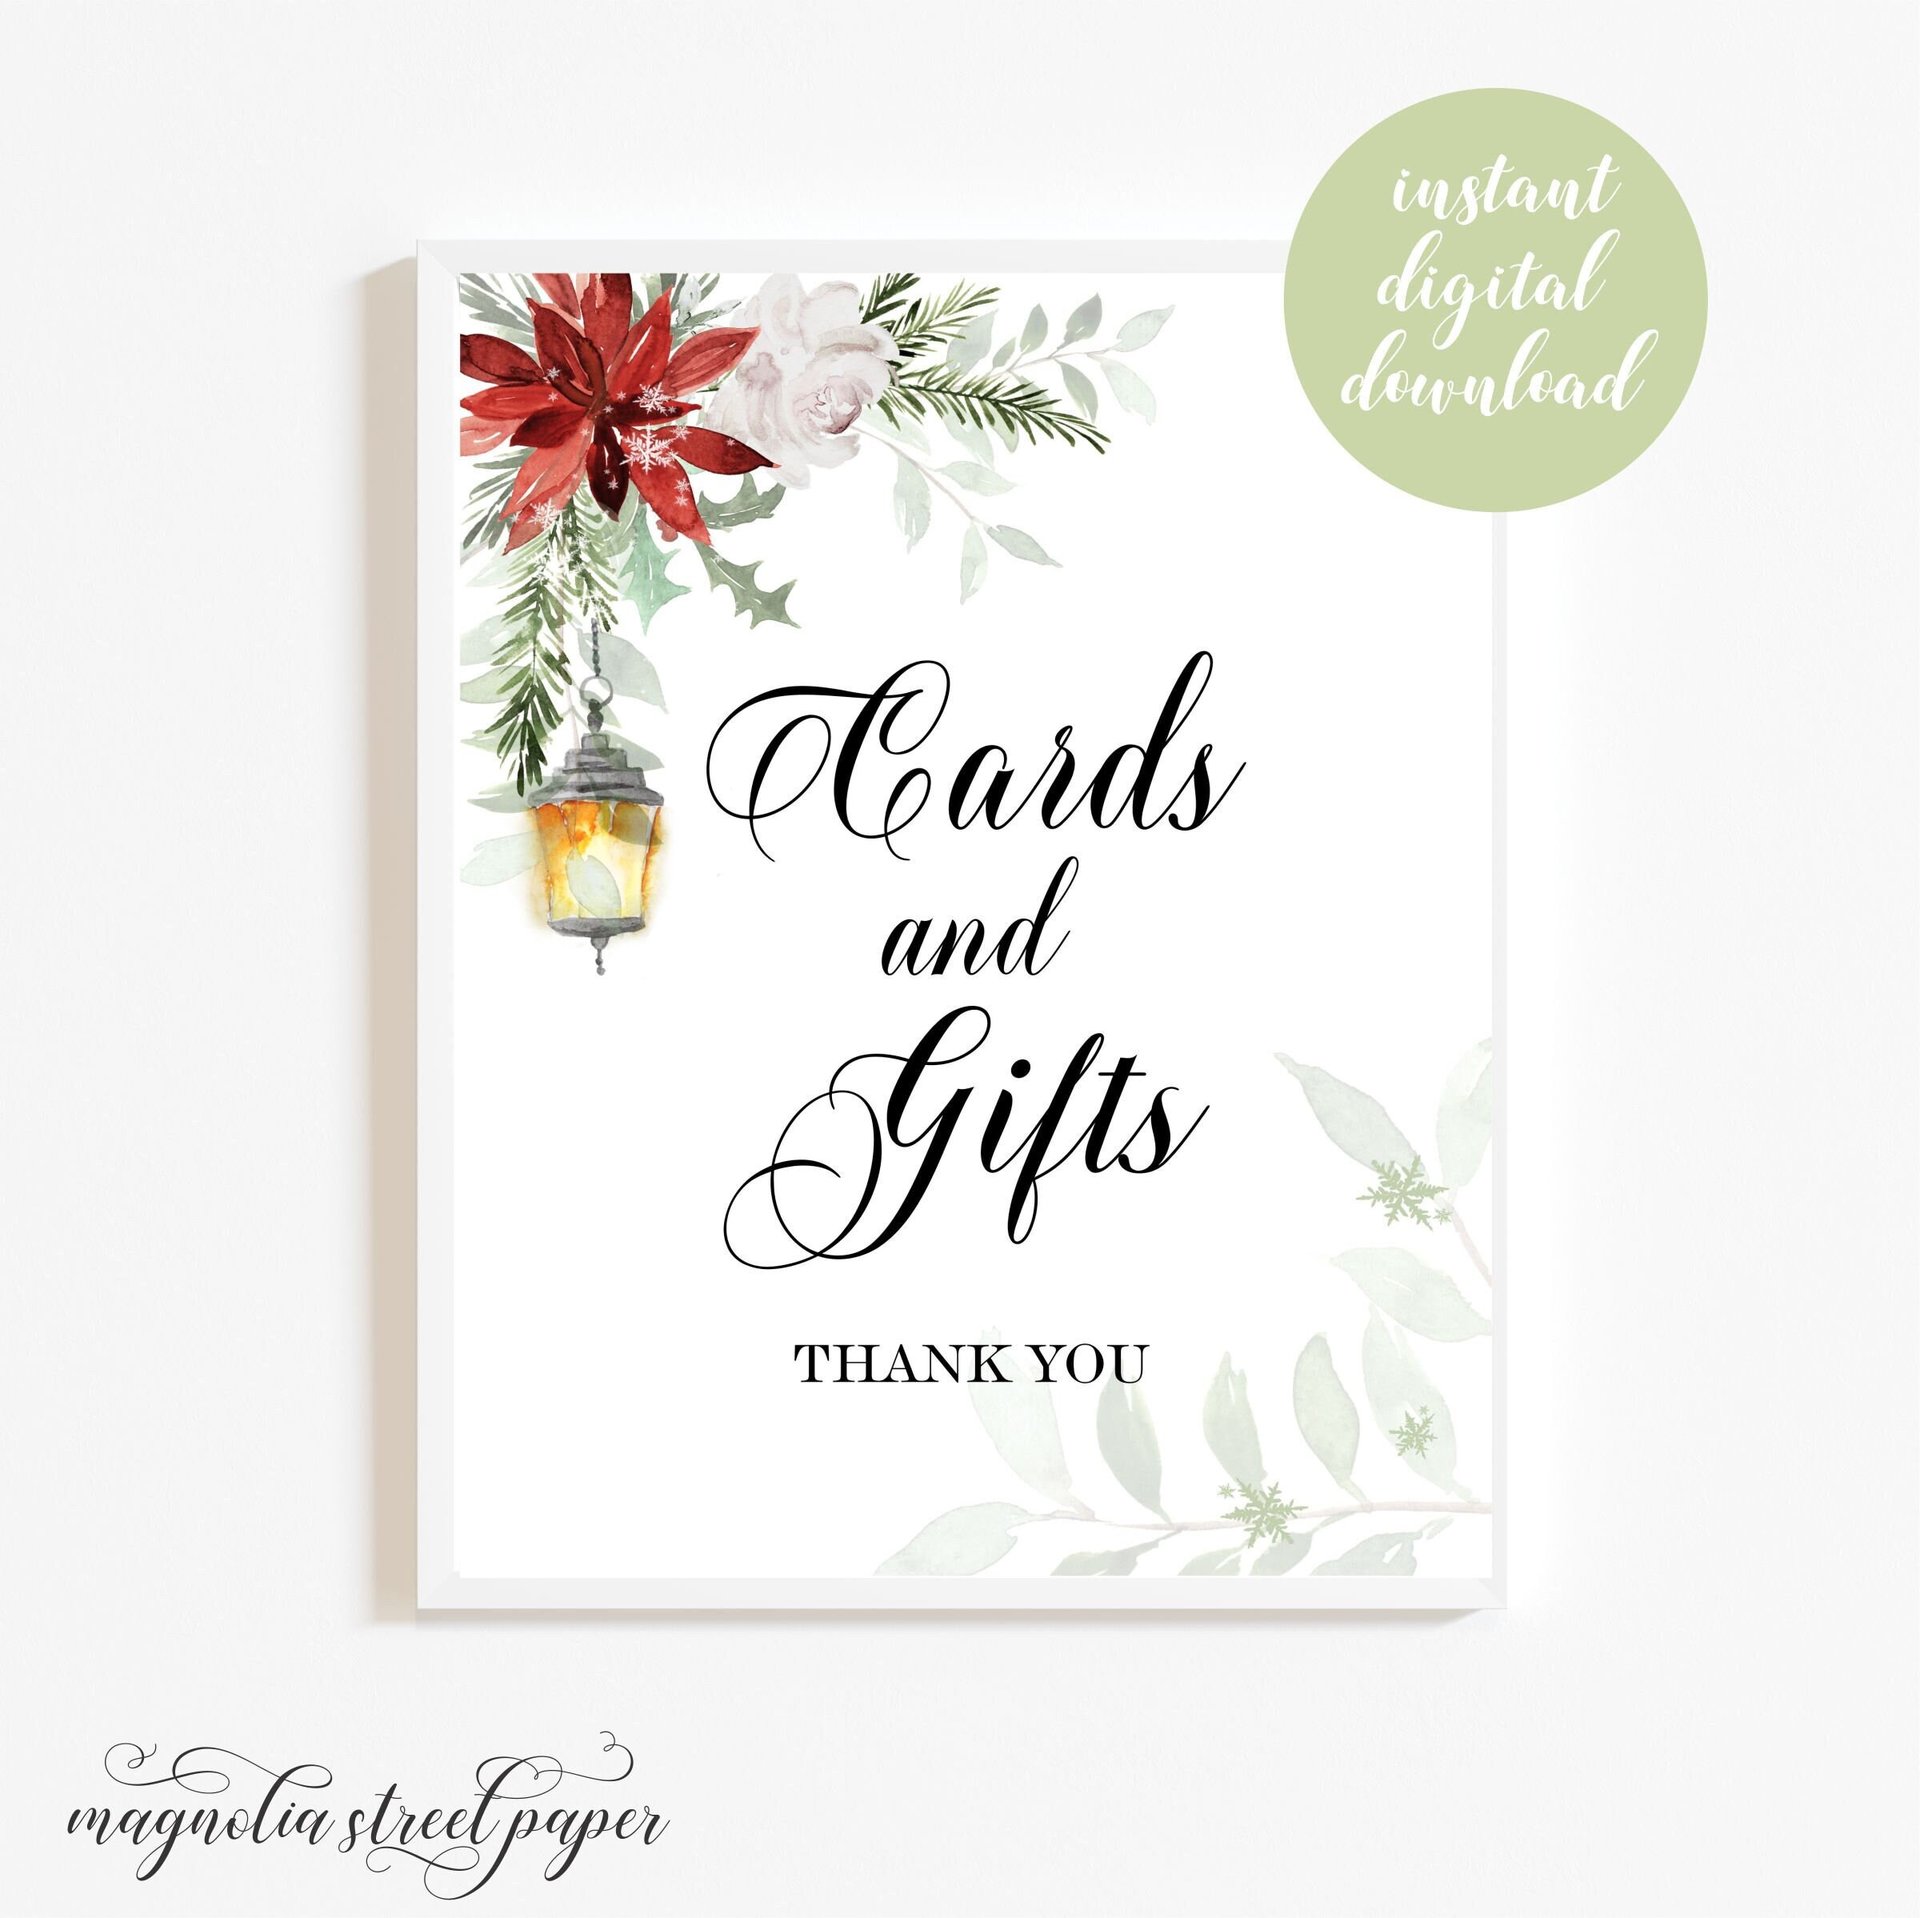 Printable Winter Cards and Gifts Sign, Wedding, Bridal or Baby Shower Sign